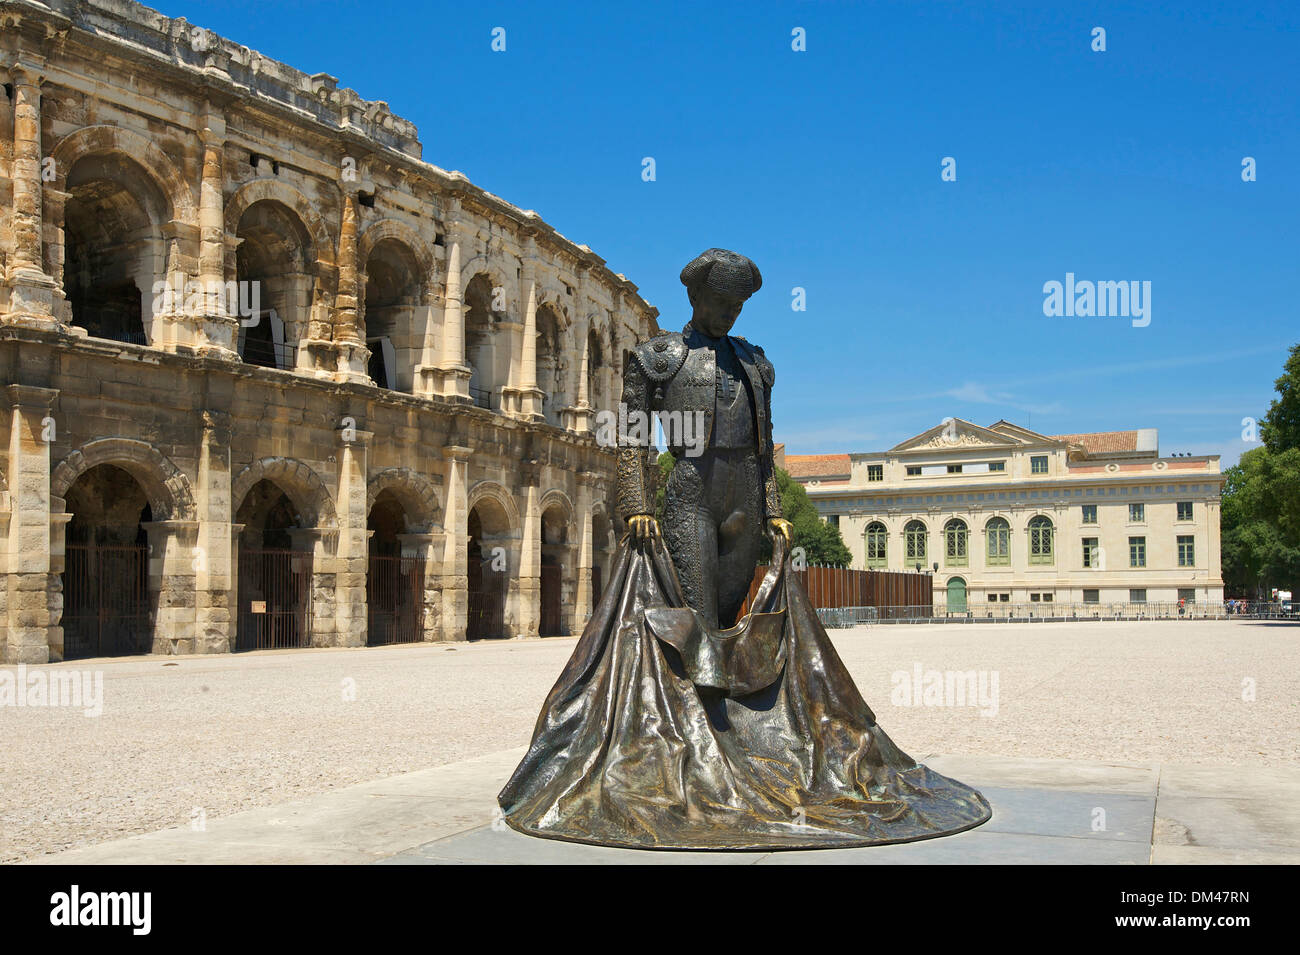 France Europe Provence South of France amphitheater Roman building architecture historical old landmark place of interest Nimes Stock Photo